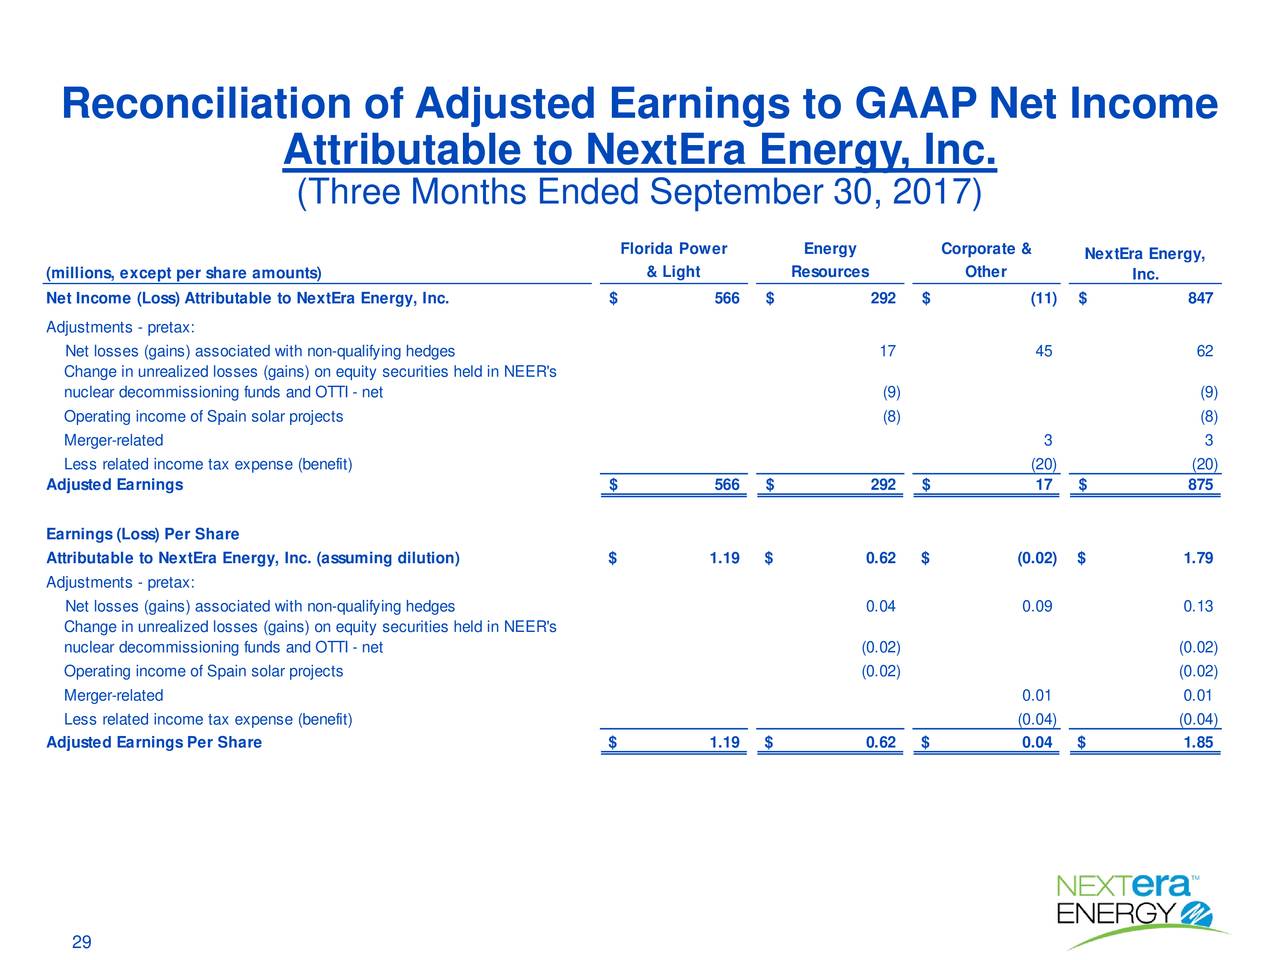 Reconciliation of Adjusted Earnings to GAAP Net Income